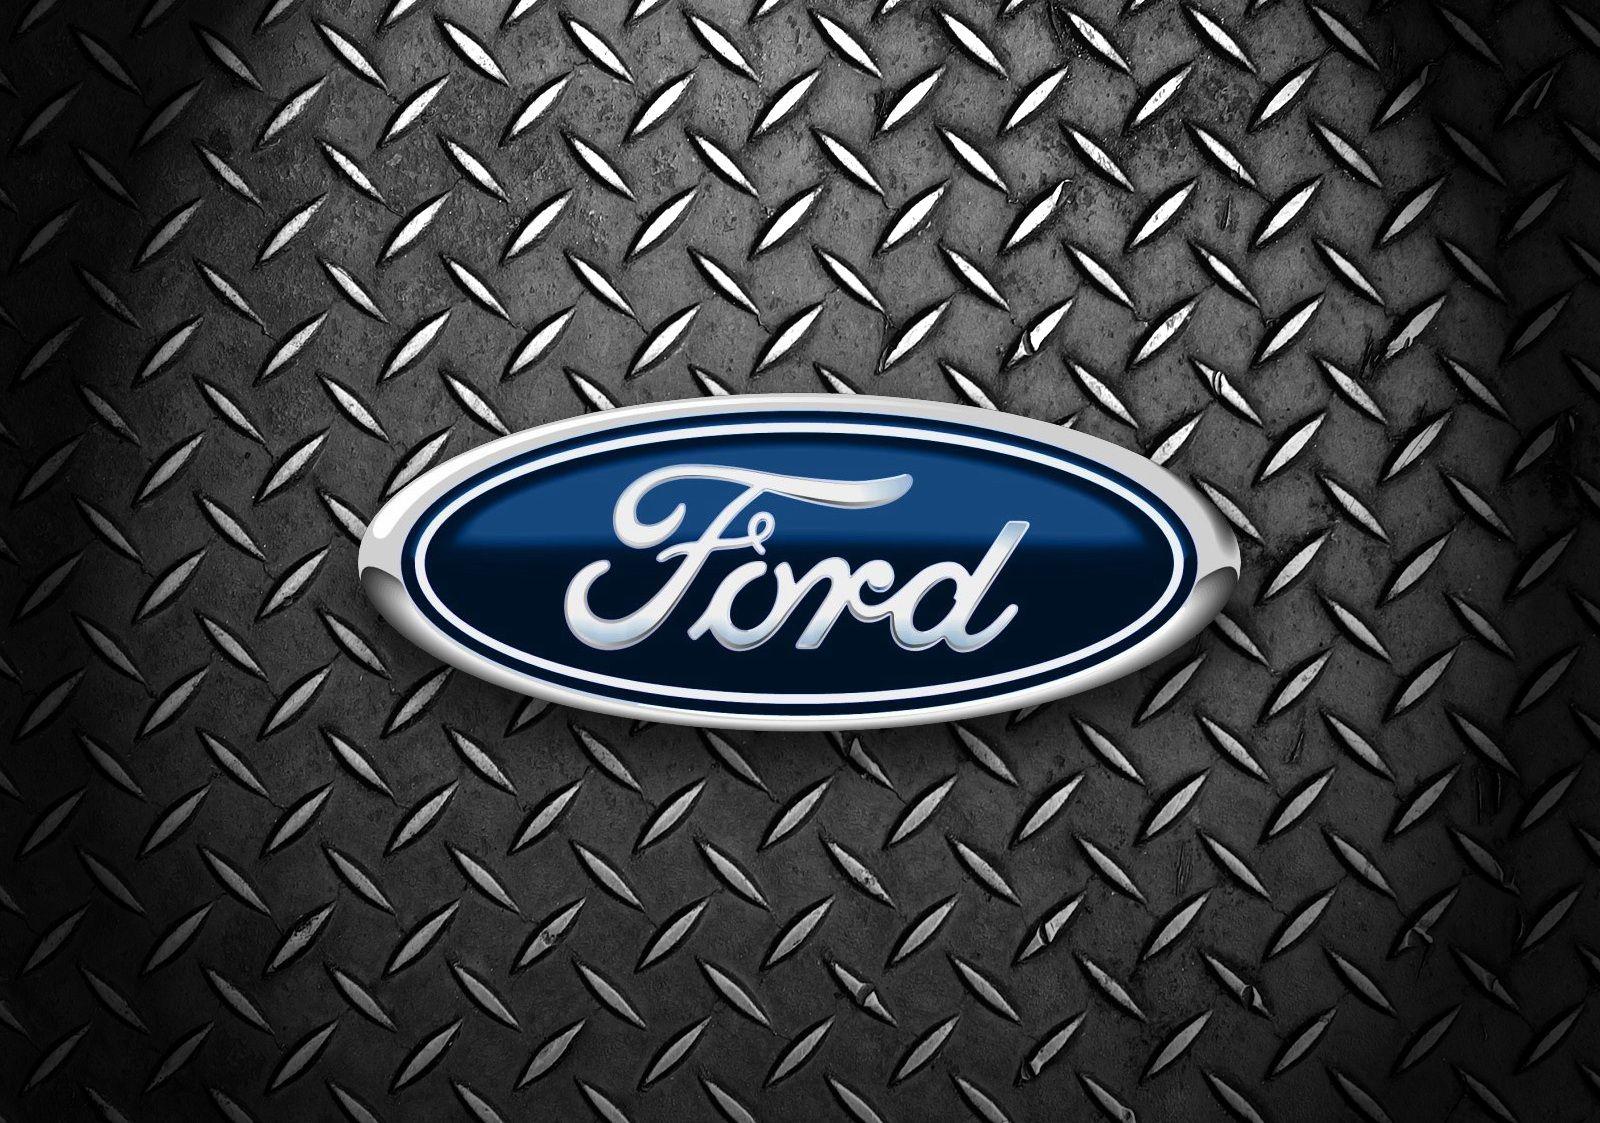 Ford Oval Logo - Ford Logo, Ford Car Symbol Meaning and History | Car Brand Names.com